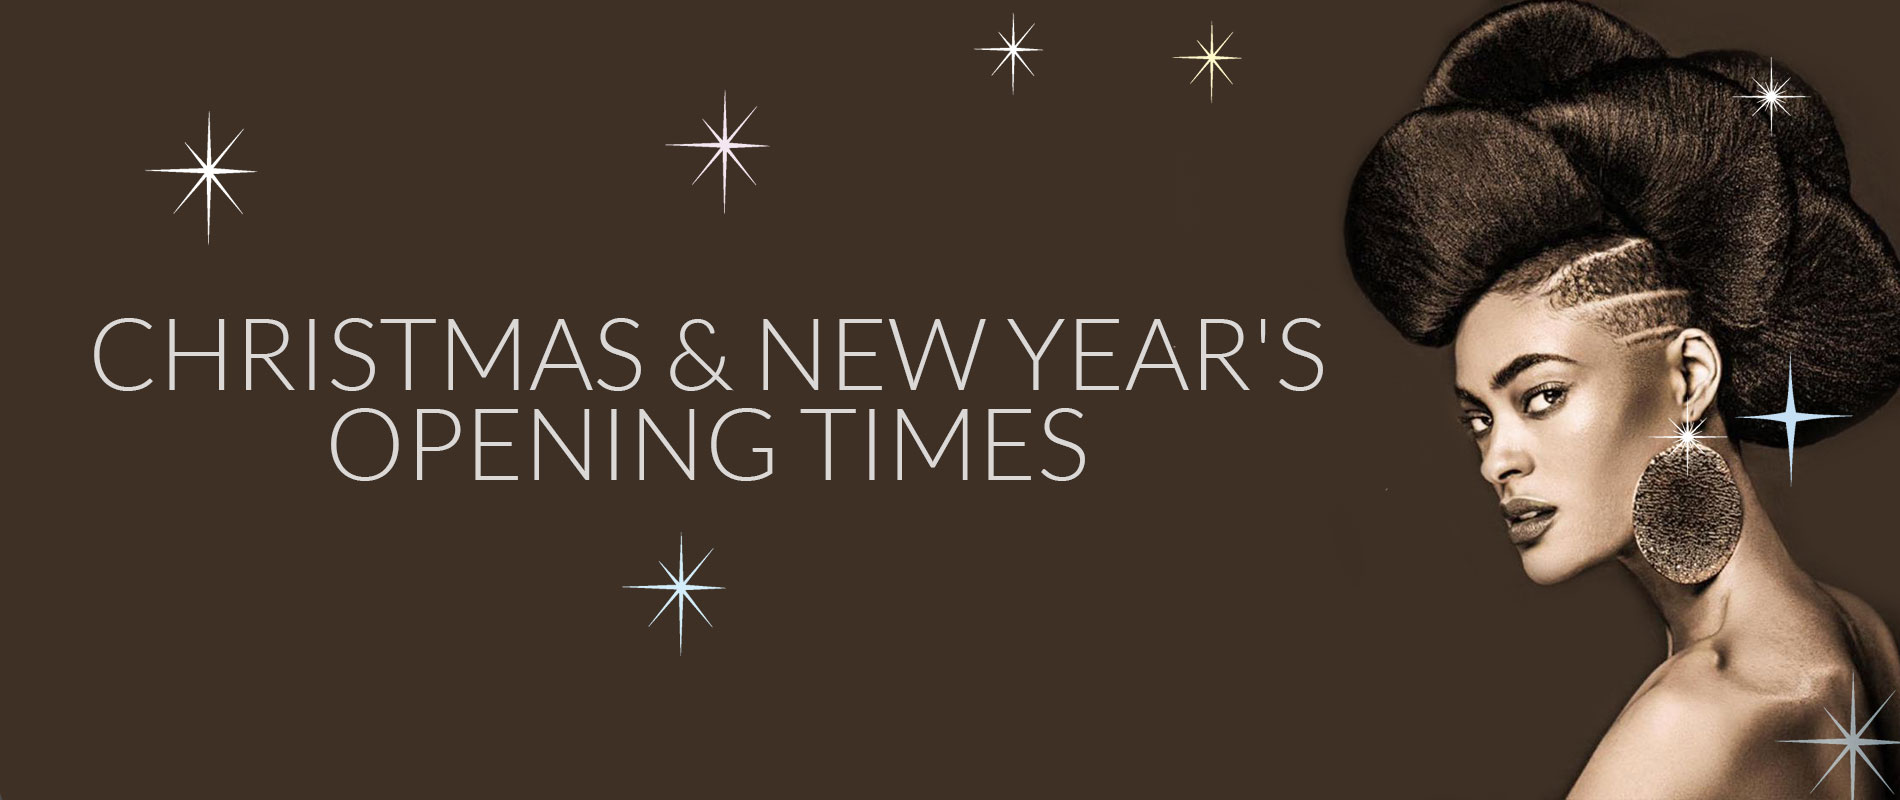 christmas & new year opening hours